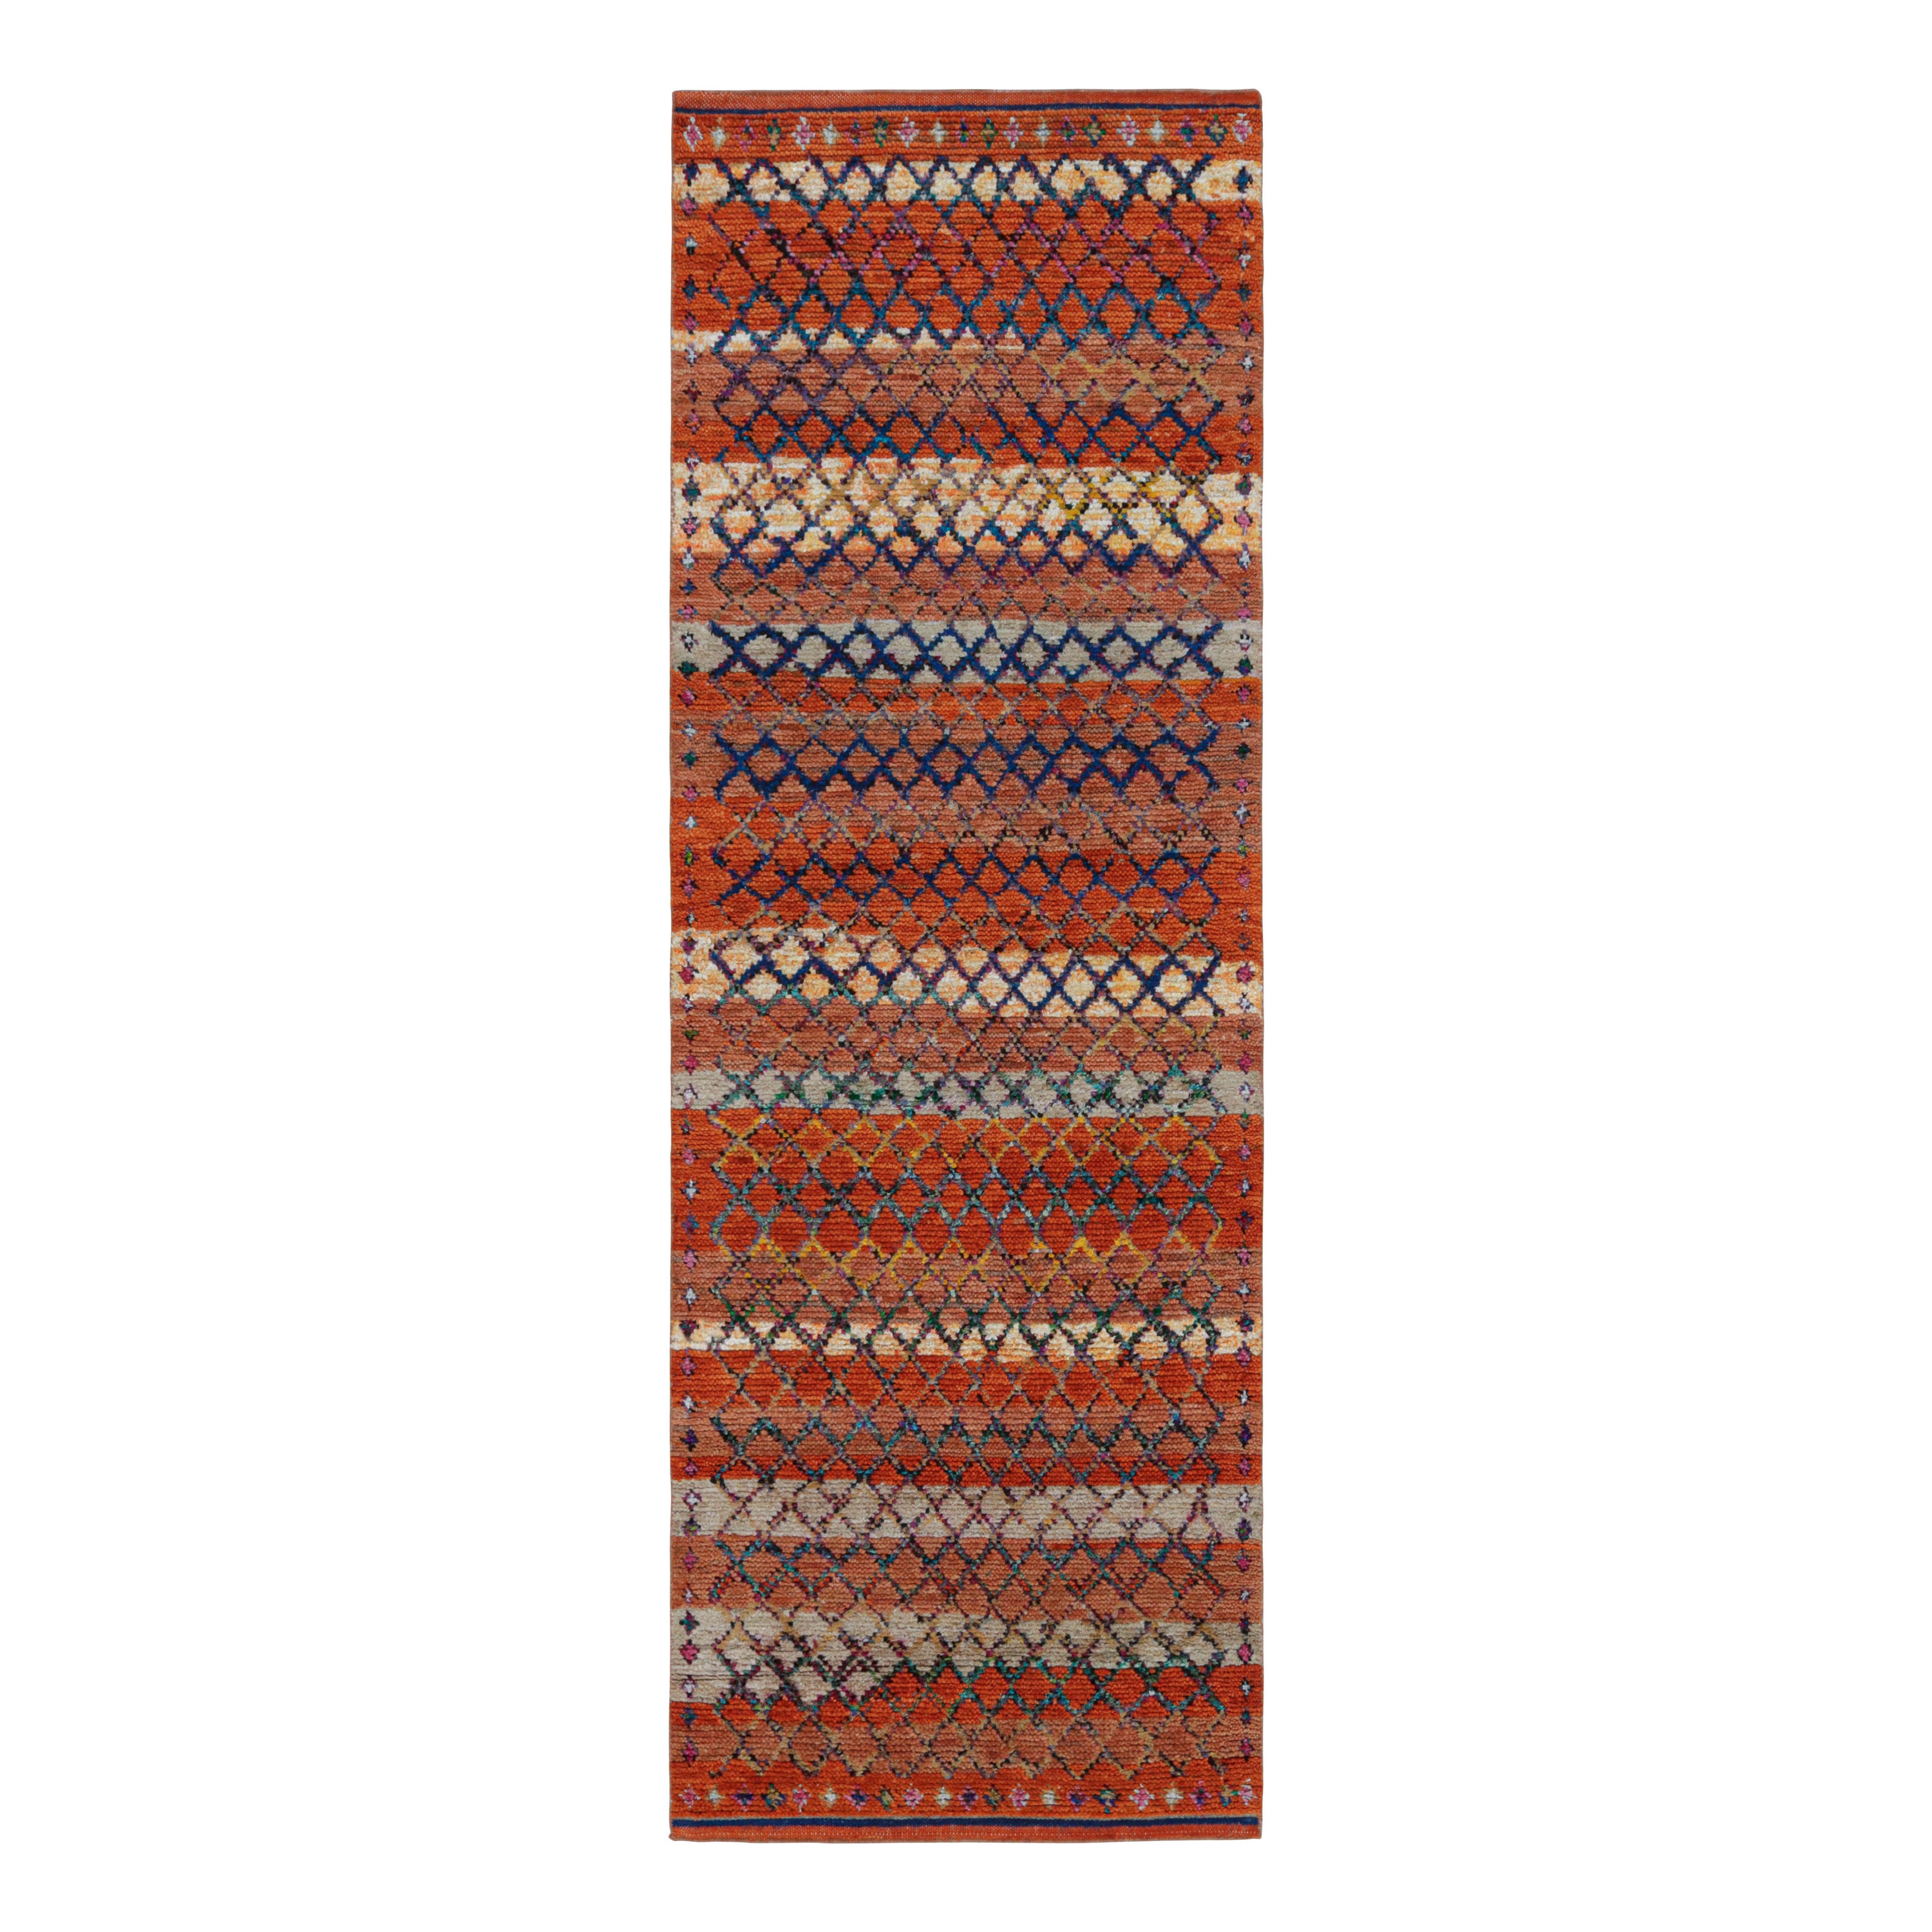 Rug & Kilim’s Moroccan Style Runner Rug in Orange with Geometric Patterns For Sale